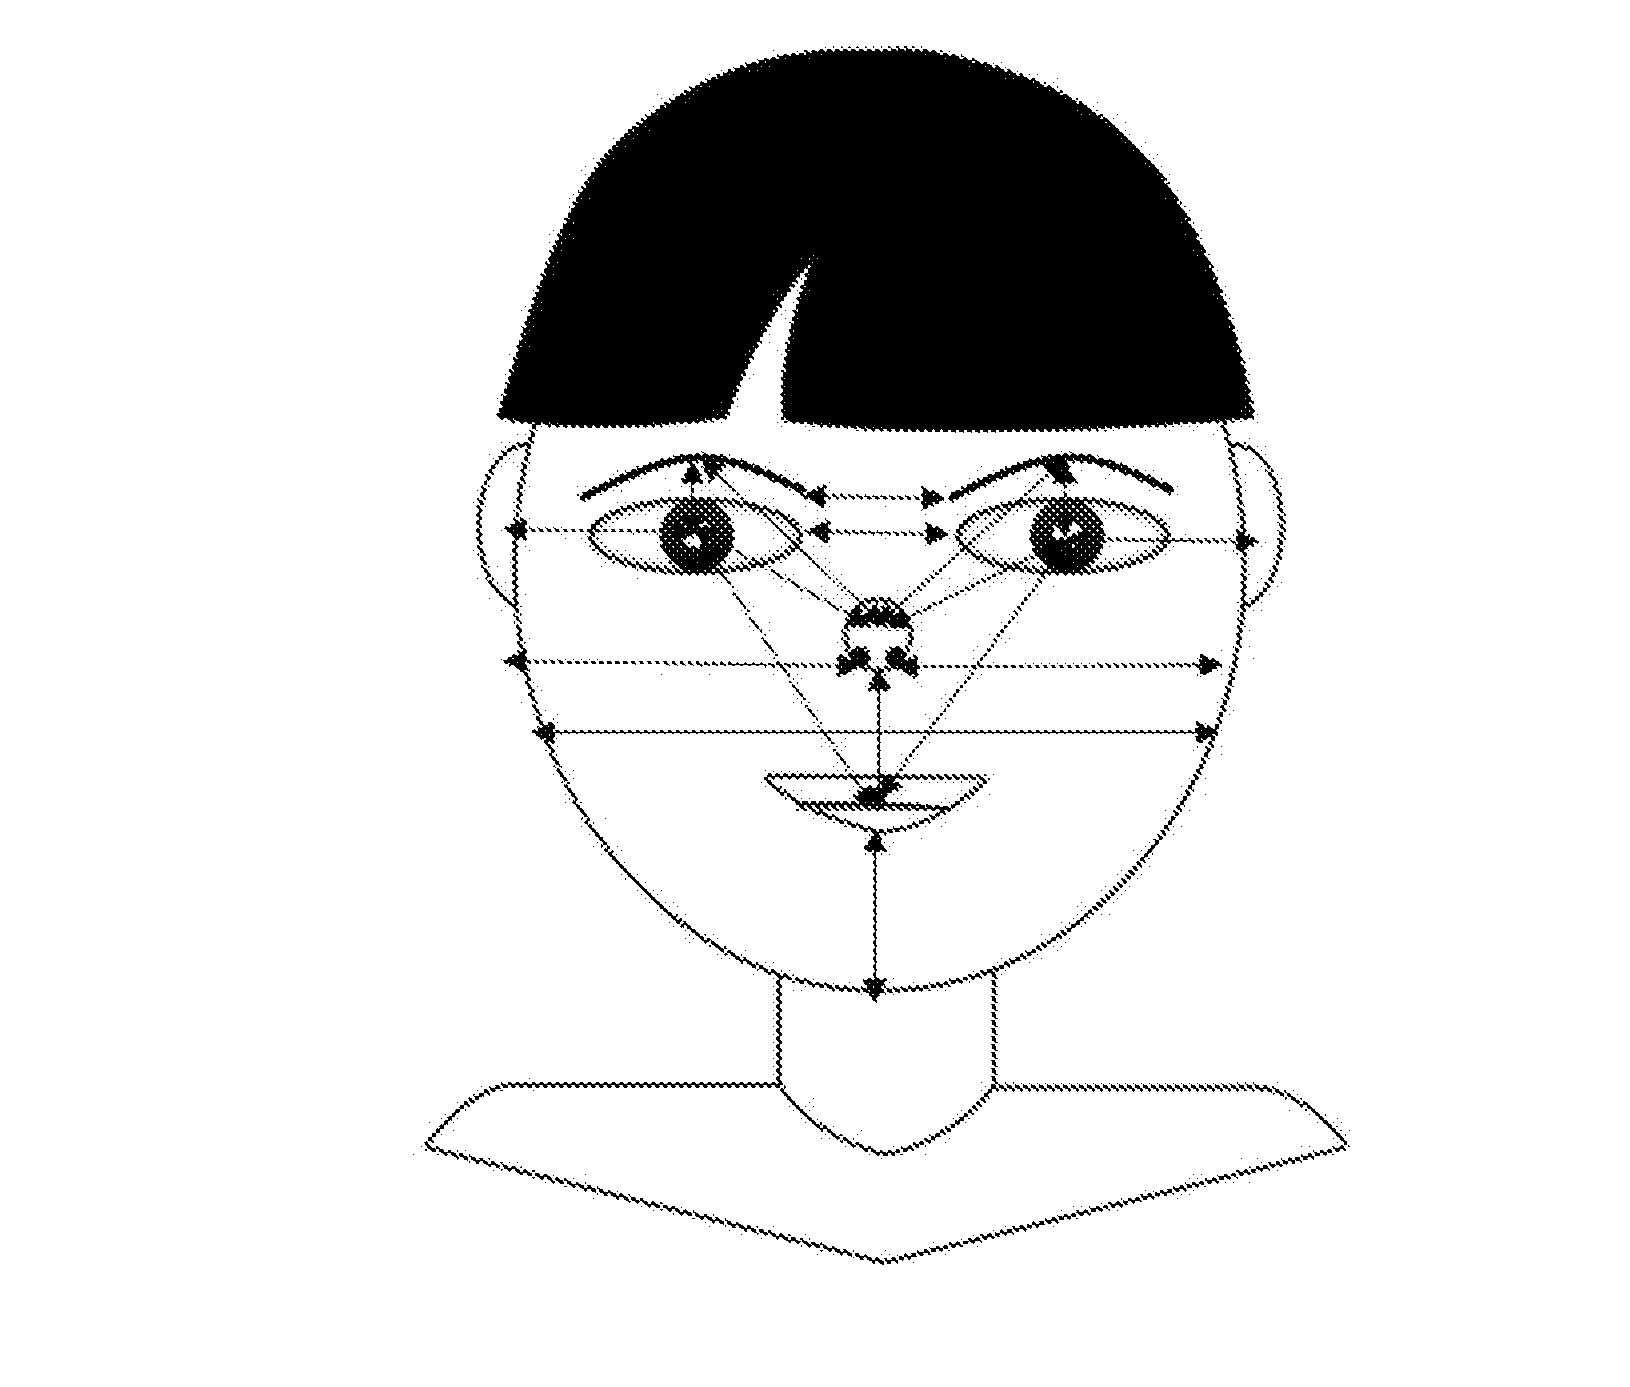 Apparatus and method for acquiring image for iris recognition using distance of facial feature